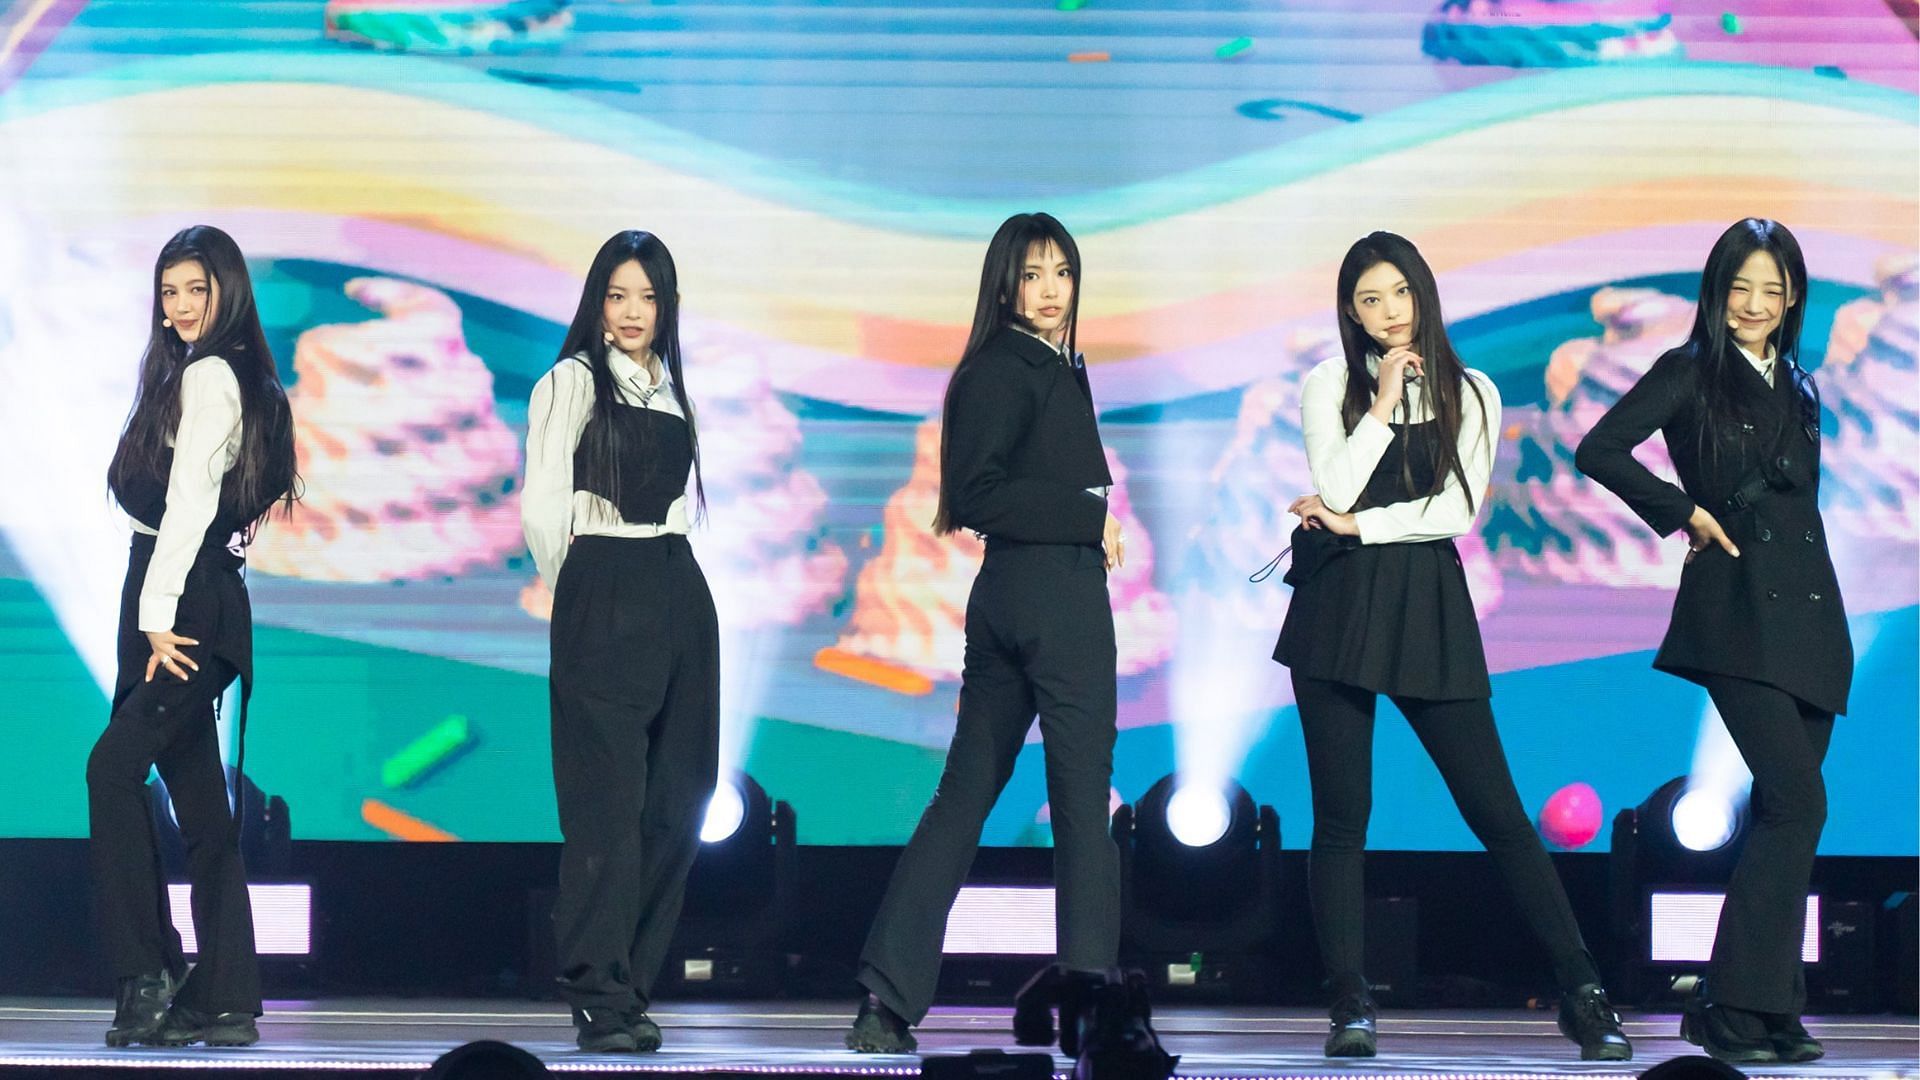 NewJeans performing at the KCON 2022 Saudi Arabia (Image via Twitter/KCON_official)